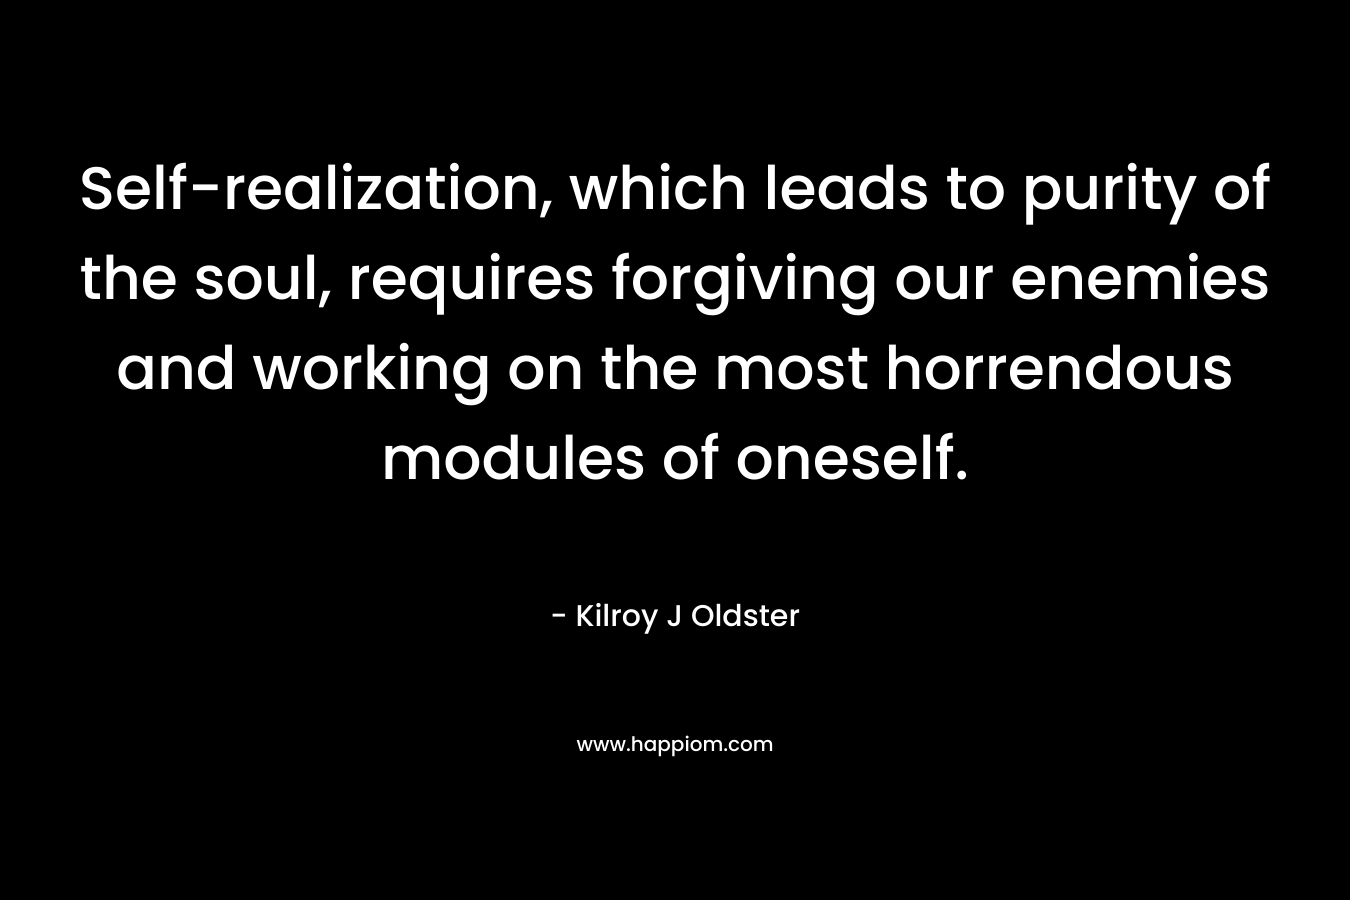 Self-realization, which leads to purity of the soul, requires forgiving our enemies and working on the most horrendous modules of oneself.